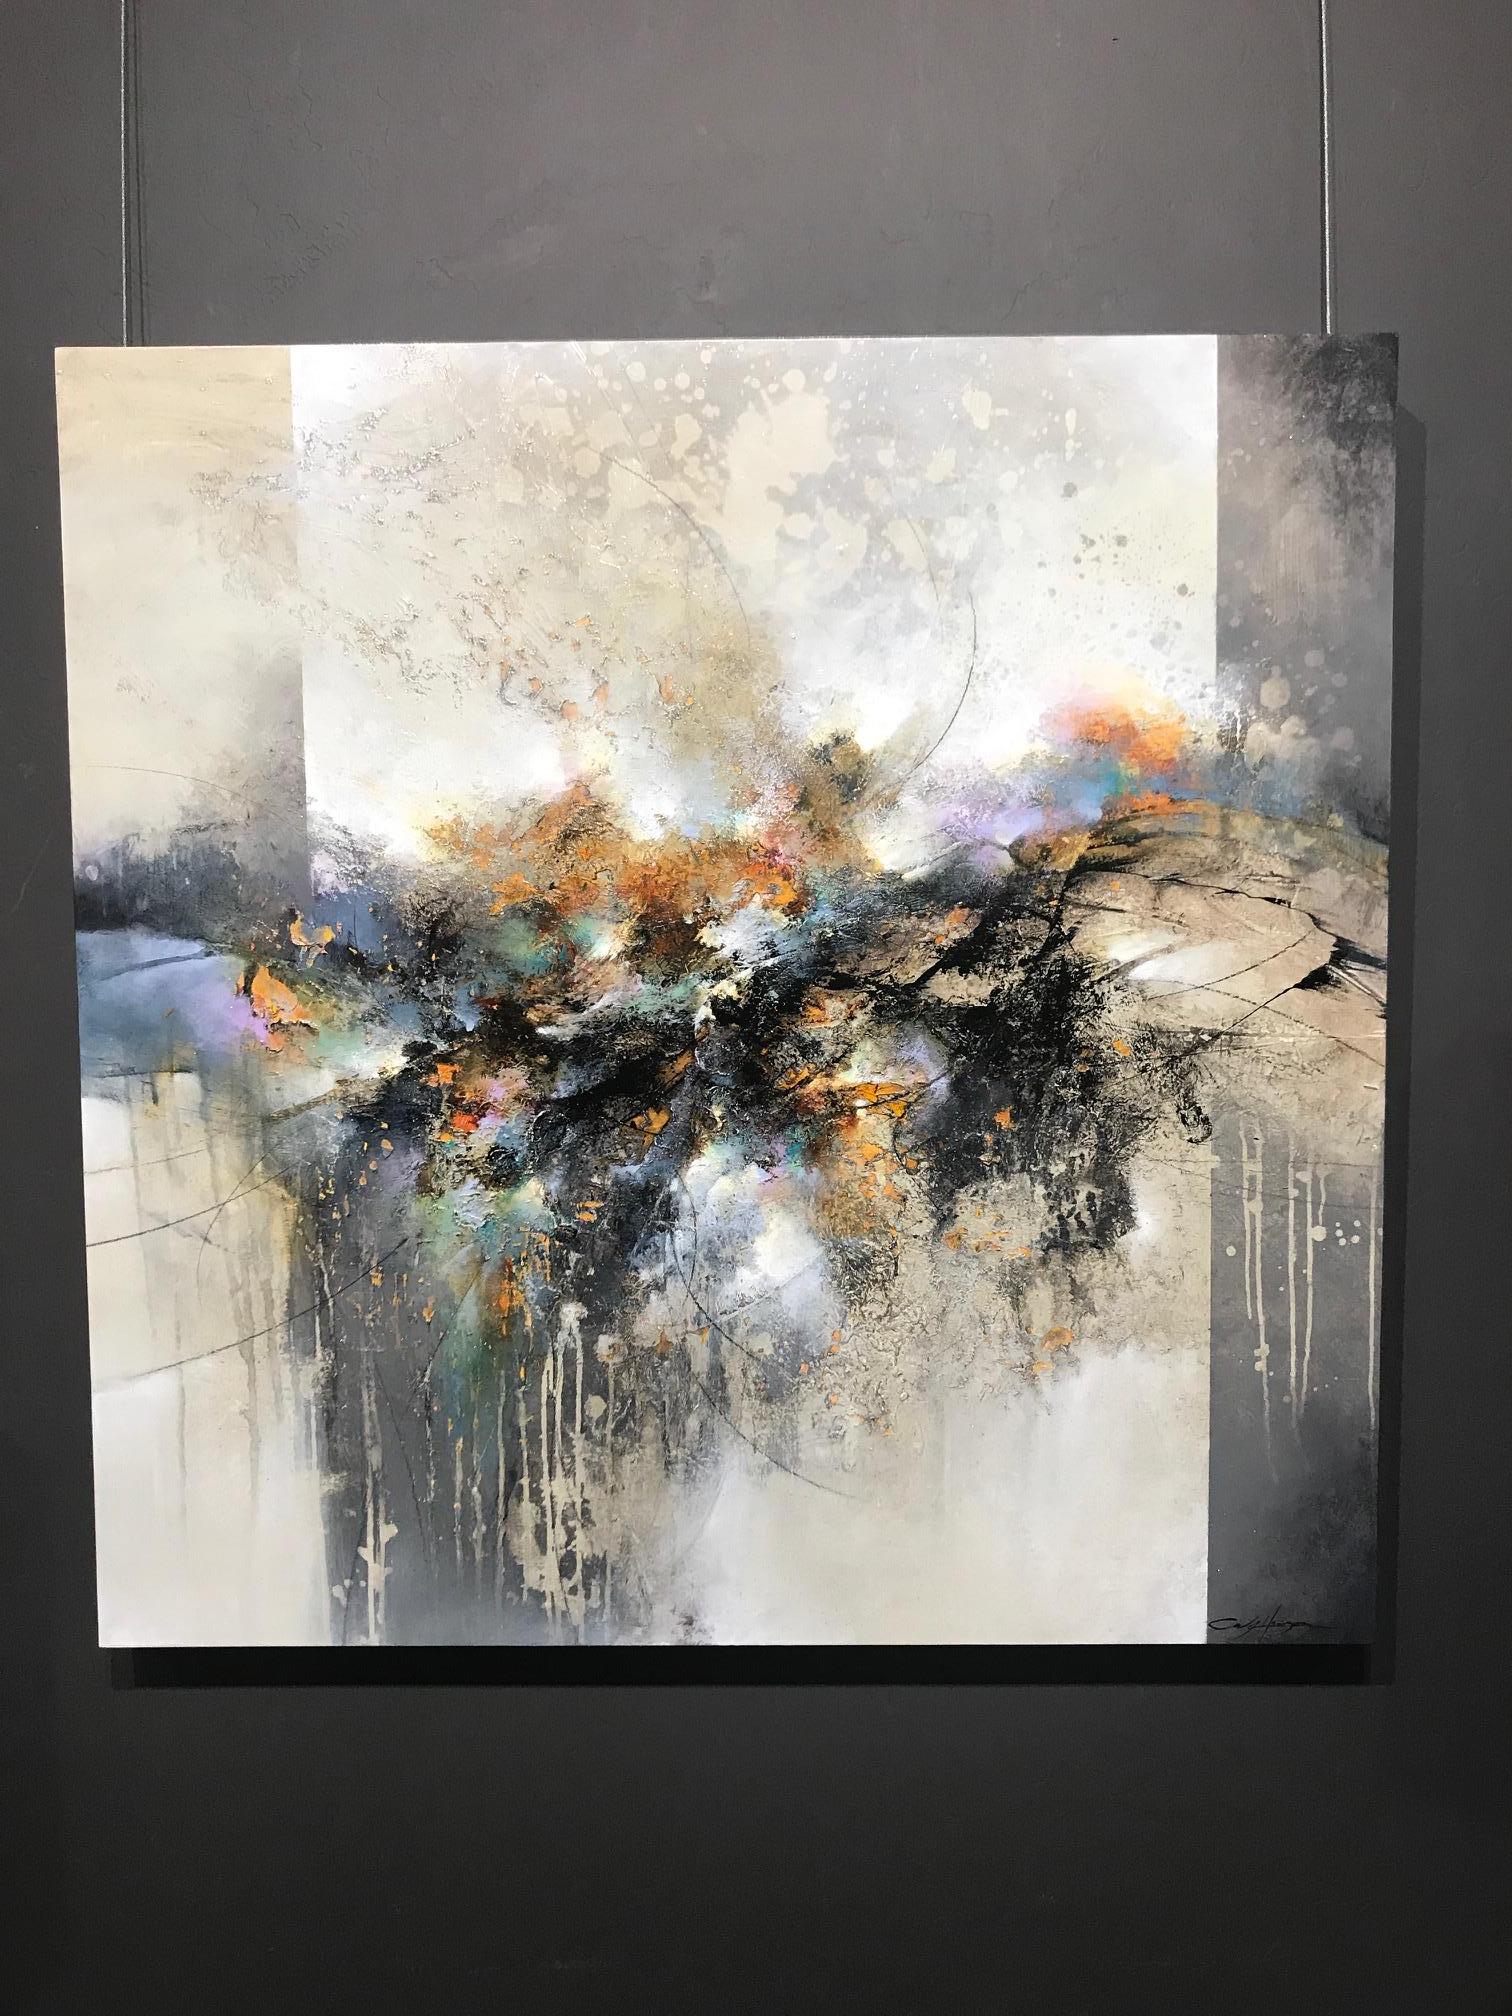 Original Contemporary, Abstract painting on wood panel. This artwork has an overall charcoal color palette that is highly textured with highlights of vibrant color, and in certain areas... peeled away to reveal layers underneath. It even has small